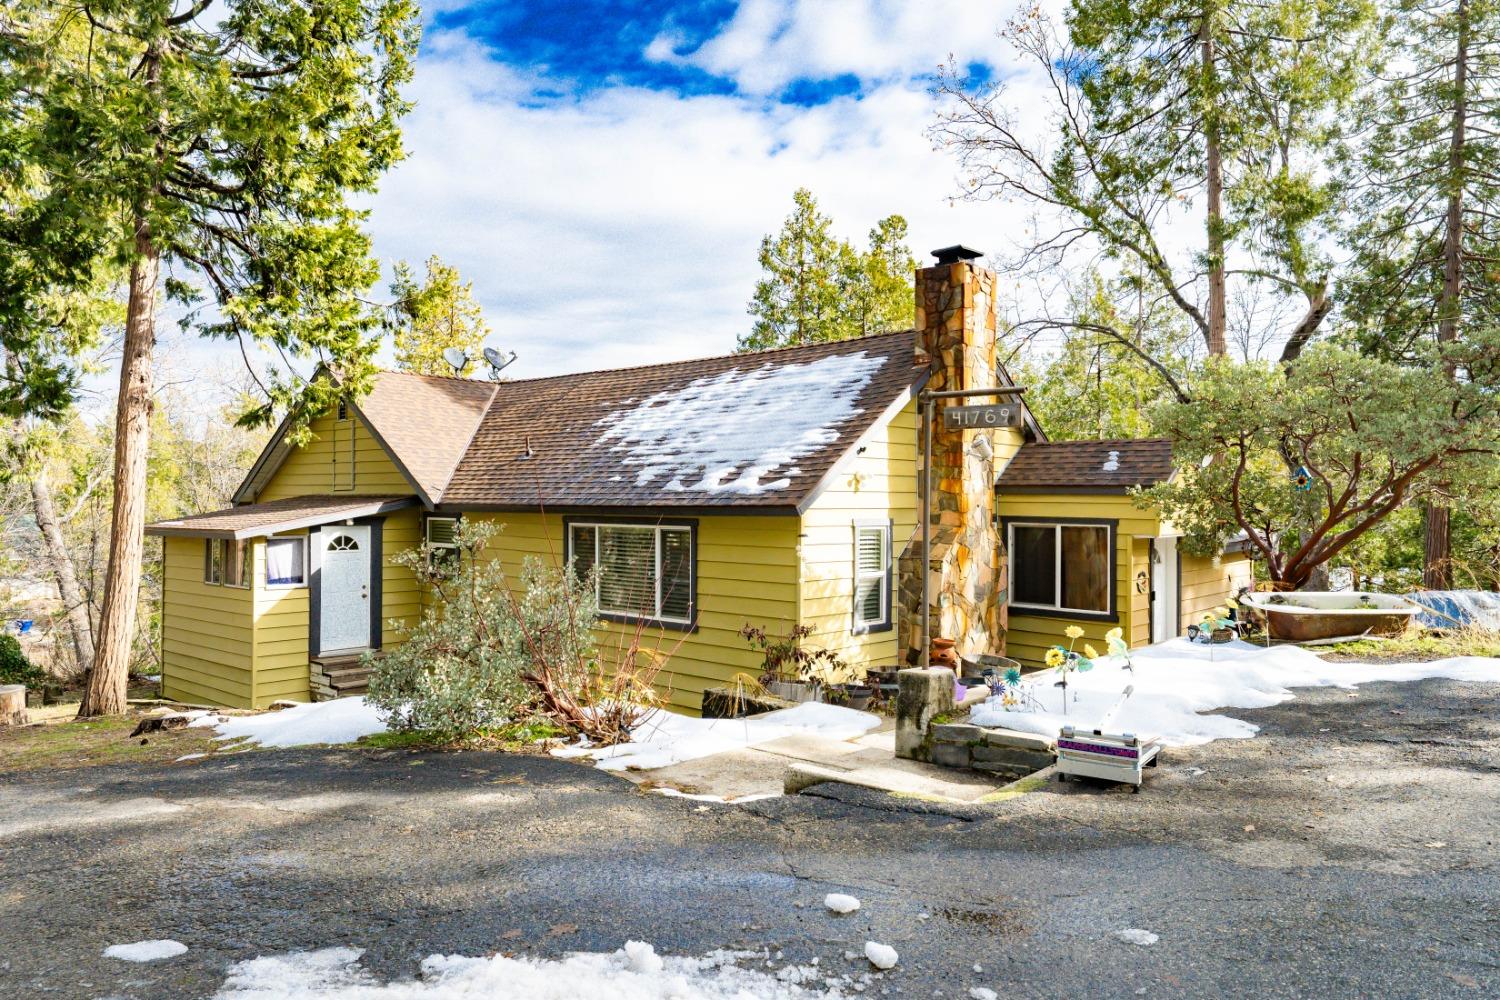 Photo of 41769 Corlew Ln in Auberry, CA